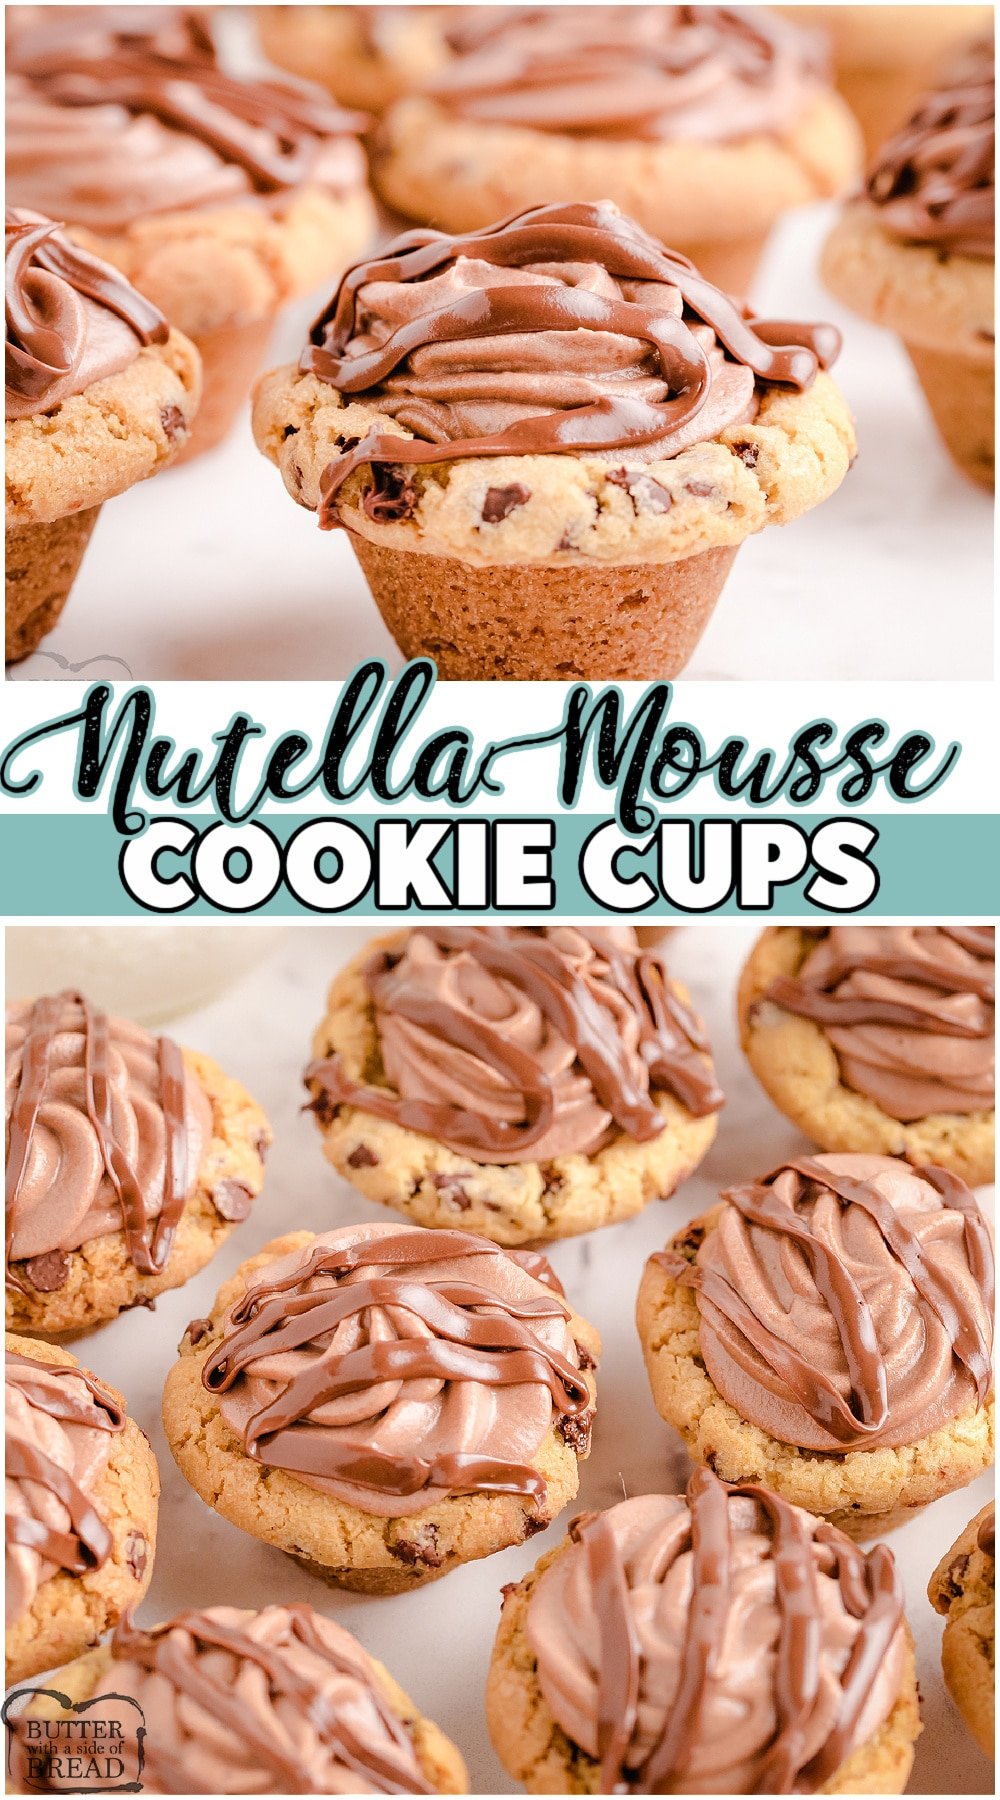 Nutella Mousse Cookie Cups made with chocolate chip cookie dough, baked & filled with an incredible 3-ingredient Nutella Mousse! Drizzled with more Nutella for a delightful hazelnut flavor. #nutella #cookies #cookiecups #chocolatechip #baking #easyrecipe from BUTTER WITH A SIDE OF BREAD